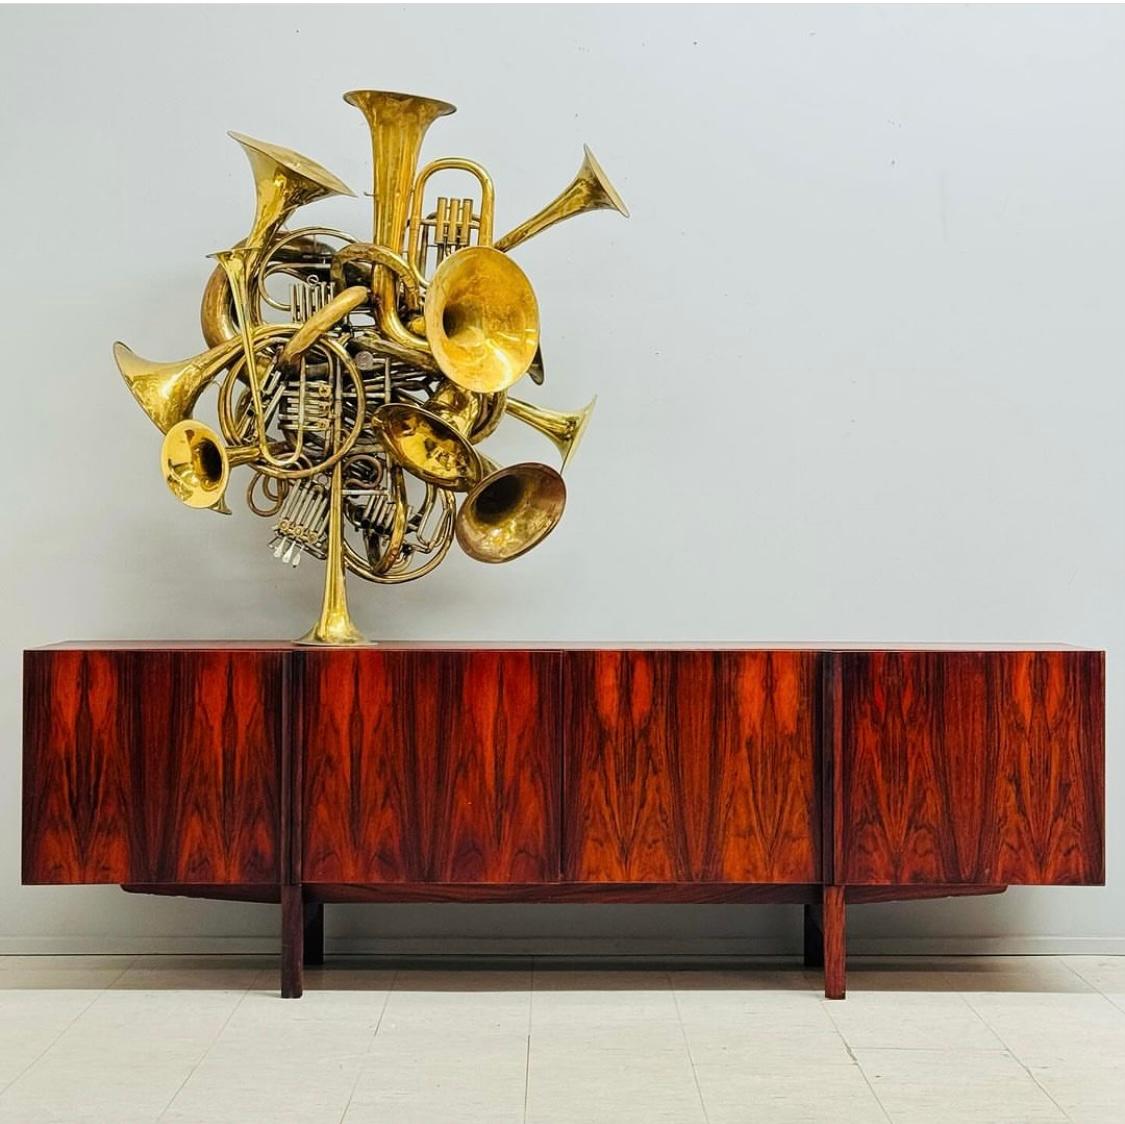 Stunning Rosewood credenza designed by IB Kofod-Larsen for Faarup Mobelfabrik. Very Rare model. Circa 1960’s. Retains original finish and patina, The book-match rosewood graining is amazing. Hand delivery avail to New York City or anywhere en route